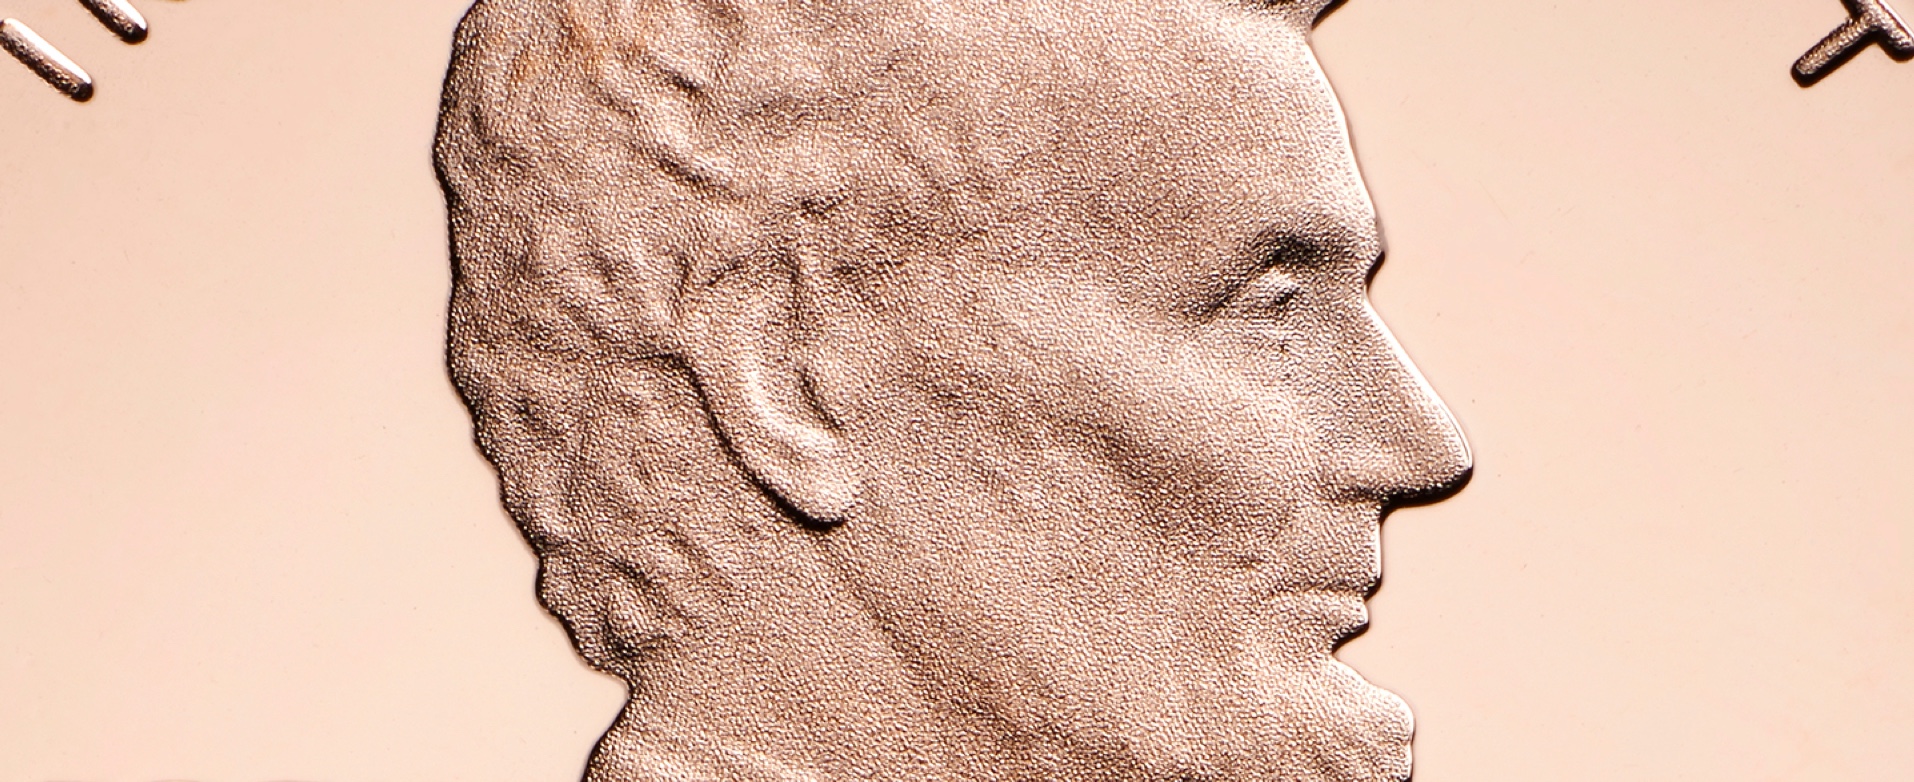 What the Lincoln Penny can teach us about leadership